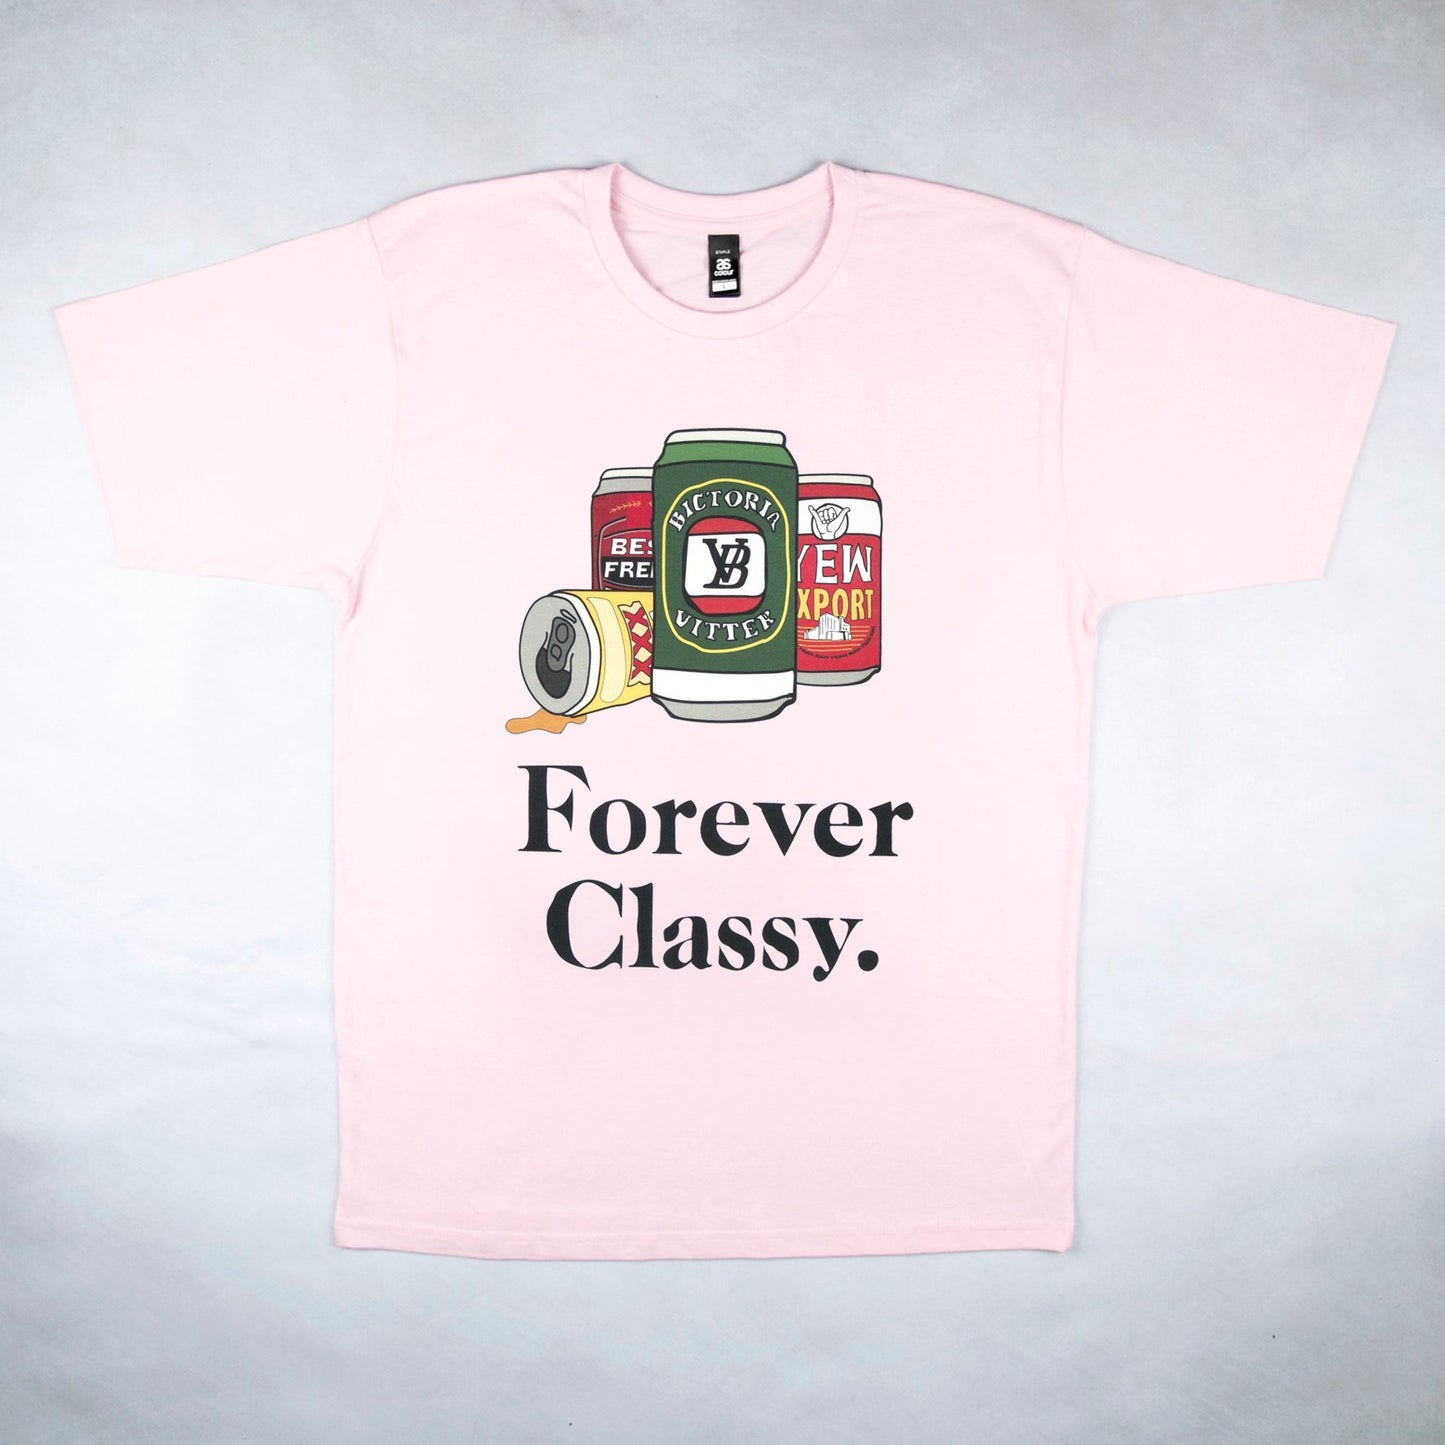 Classy Duds Short Sleeve T-Shirts Forever Classy Two Tee